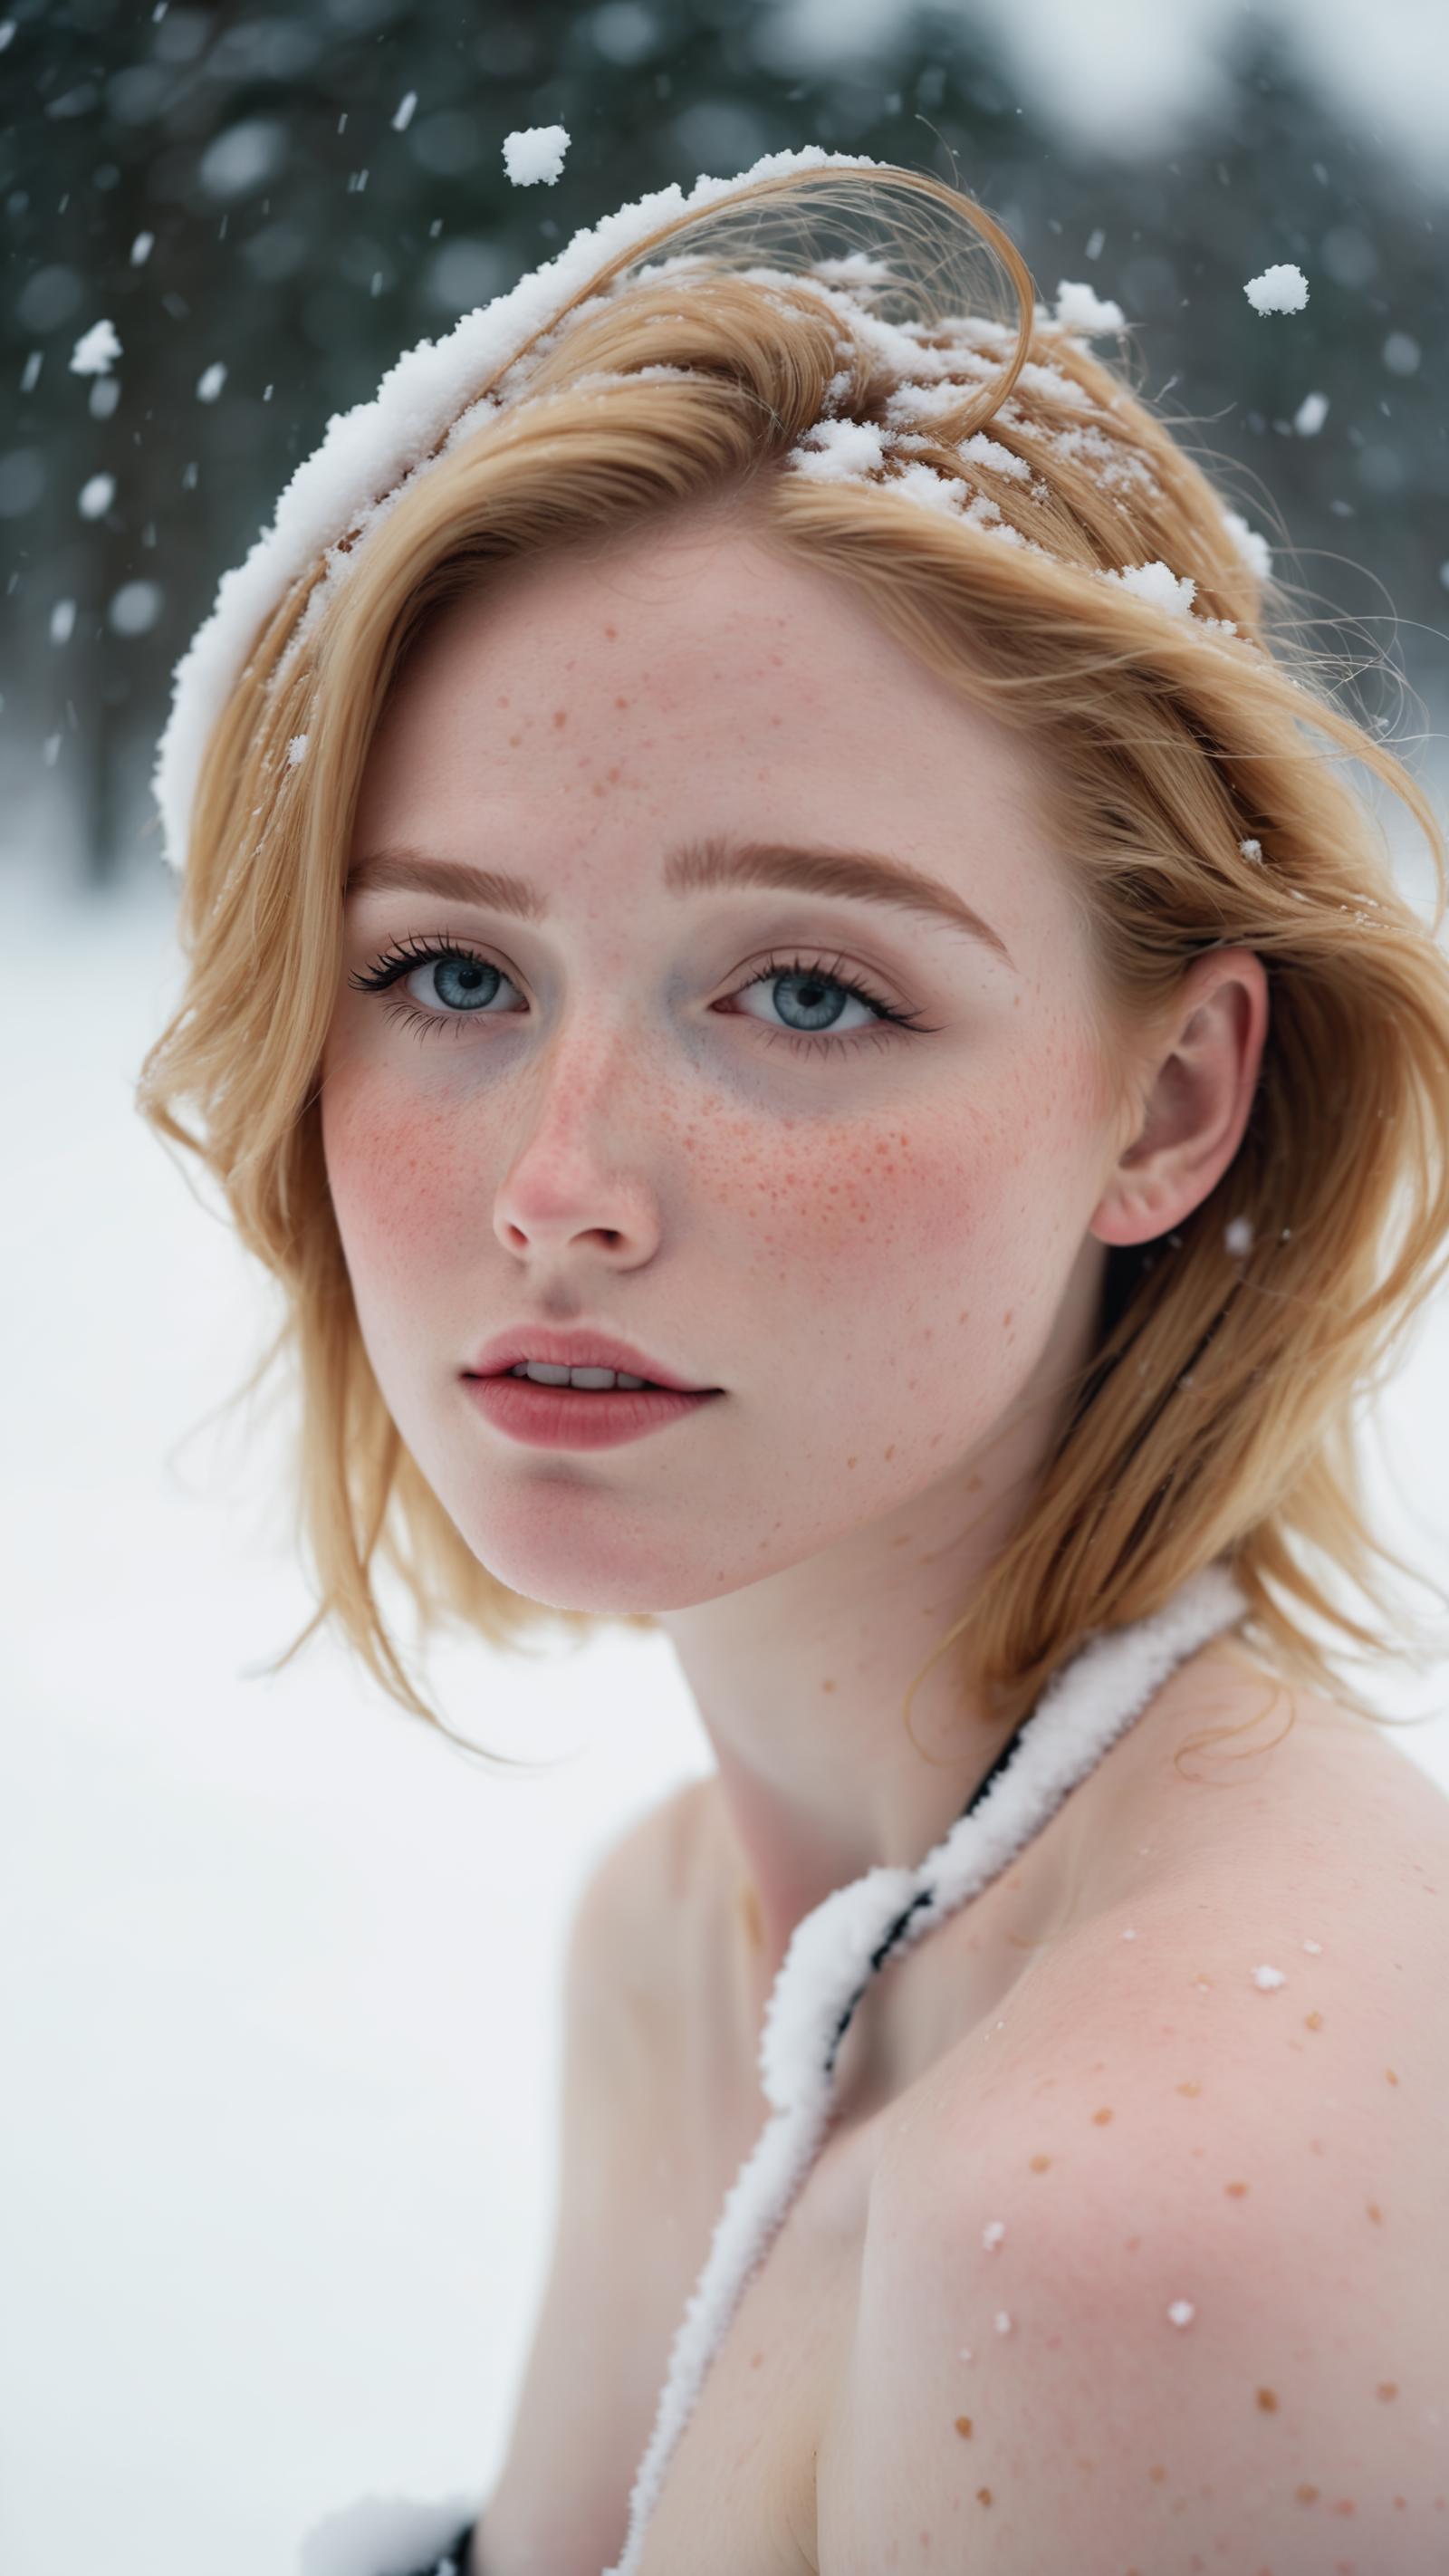 A Blonde Woman in Snow with Her Hair Covered in Snowflakes, Her Eyes Sparkling in the Sunlight.